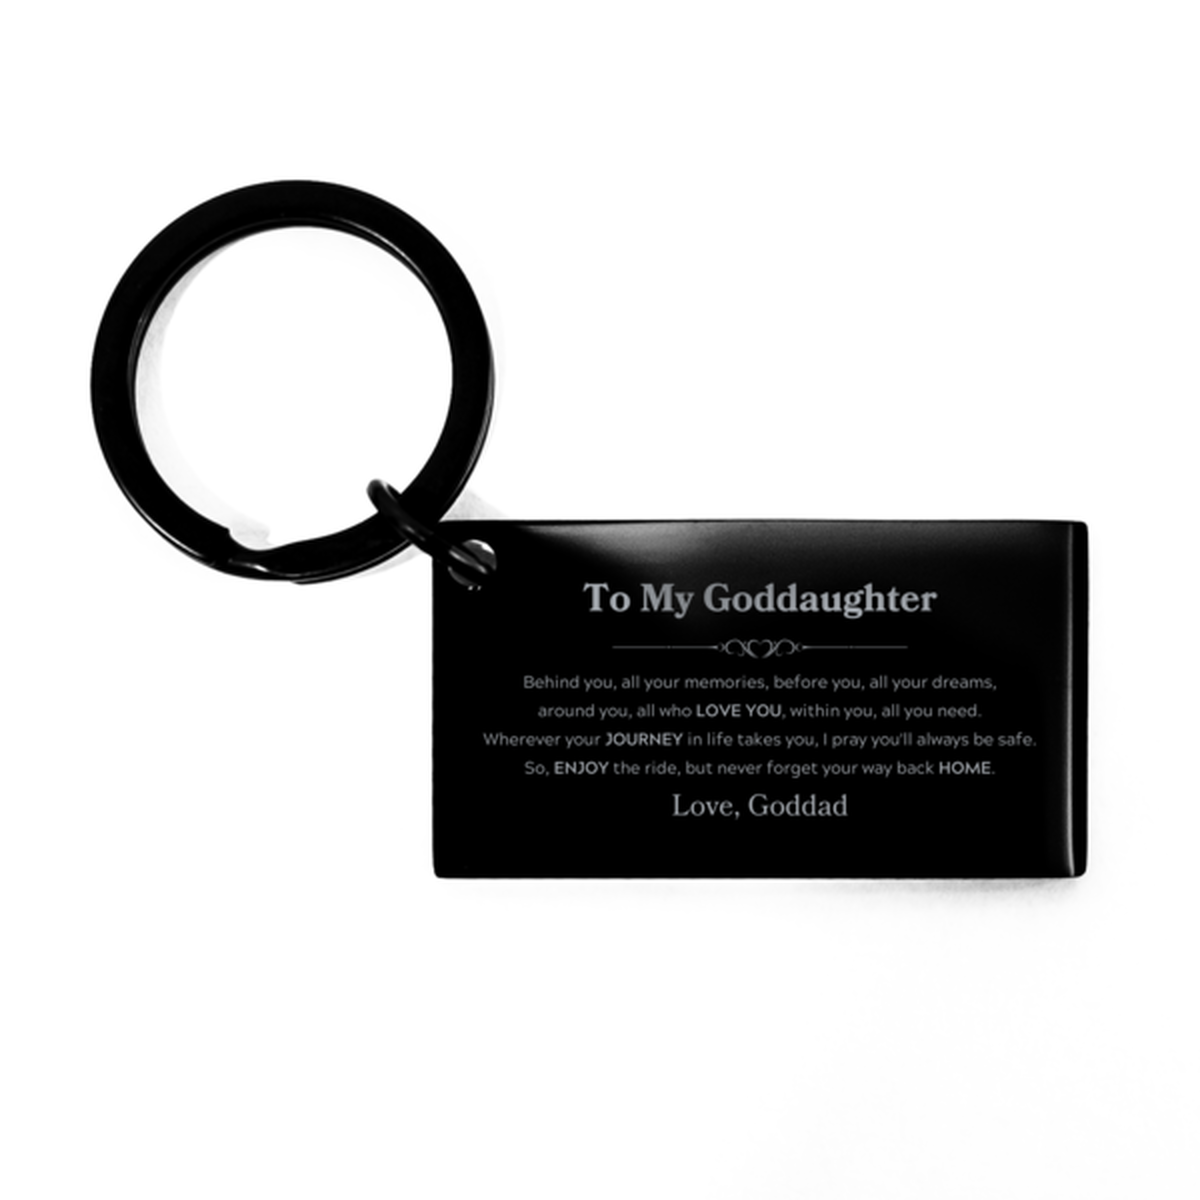 To My Goddaughter Graduation Gifts from Goddad, Goddaughter Keychain Christmas Birthday Gifts for Goddaughter Behind you, all your memories, before you, all your dreams. Love, Goddad